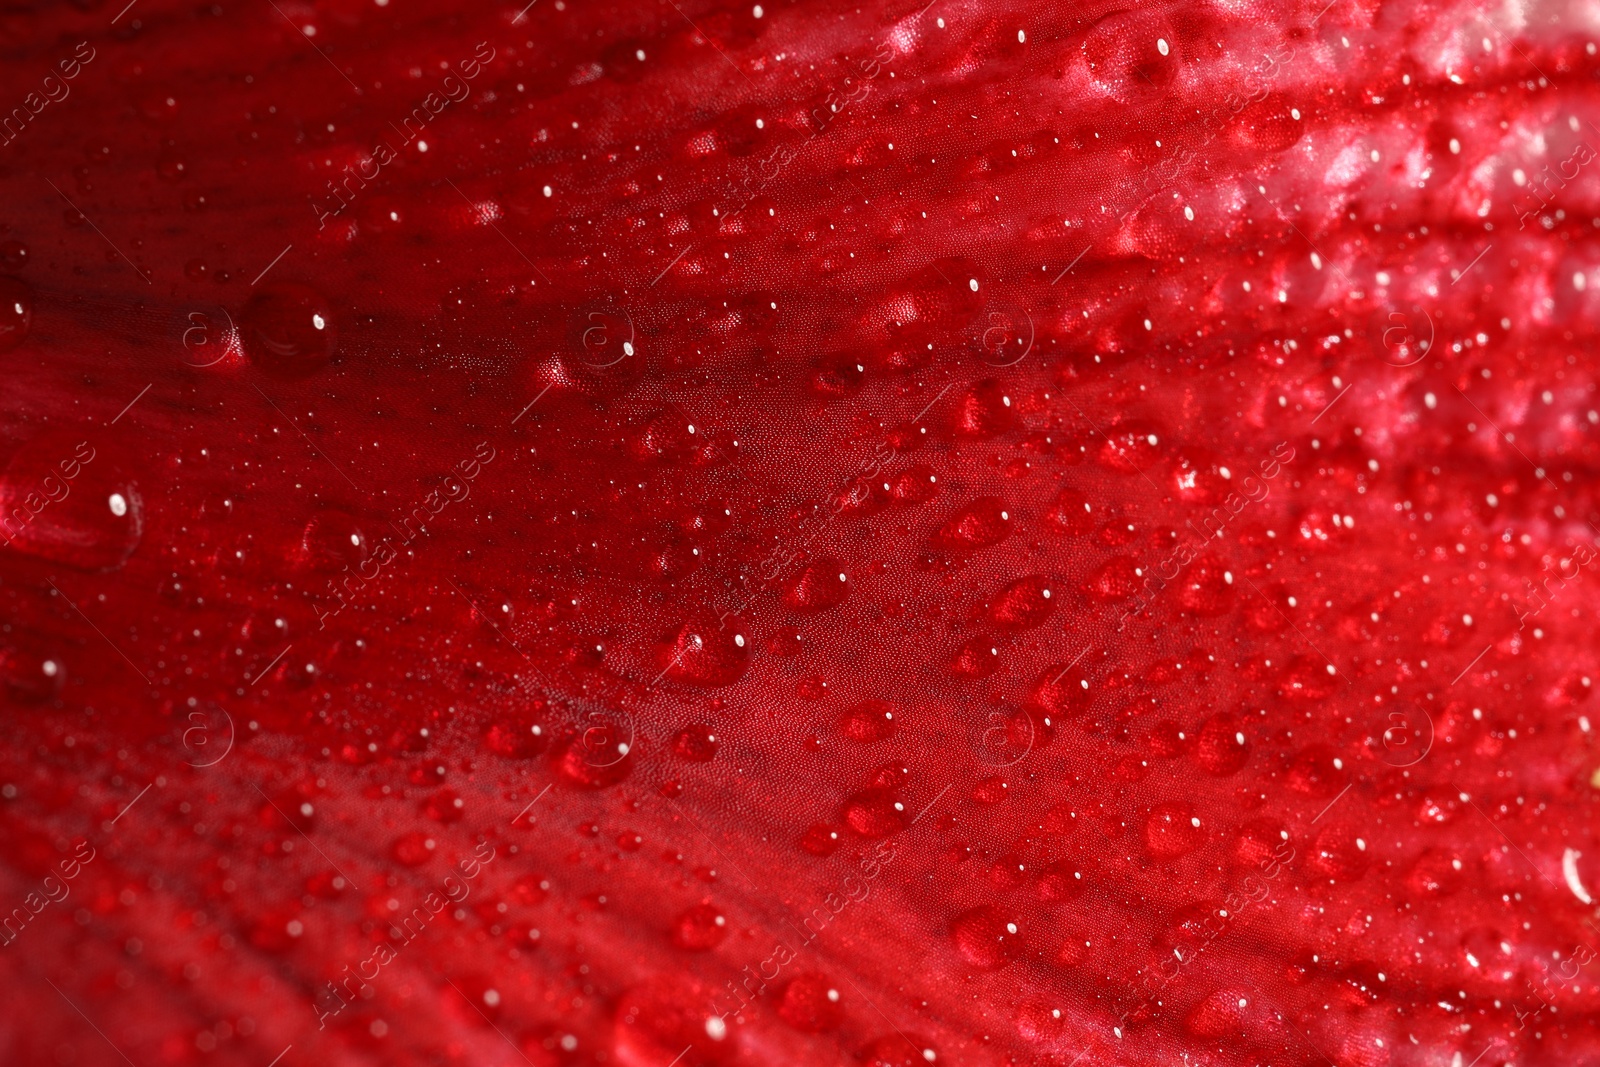 Photo of Beautiful red Amaryllis flower with water drops as background, macro view